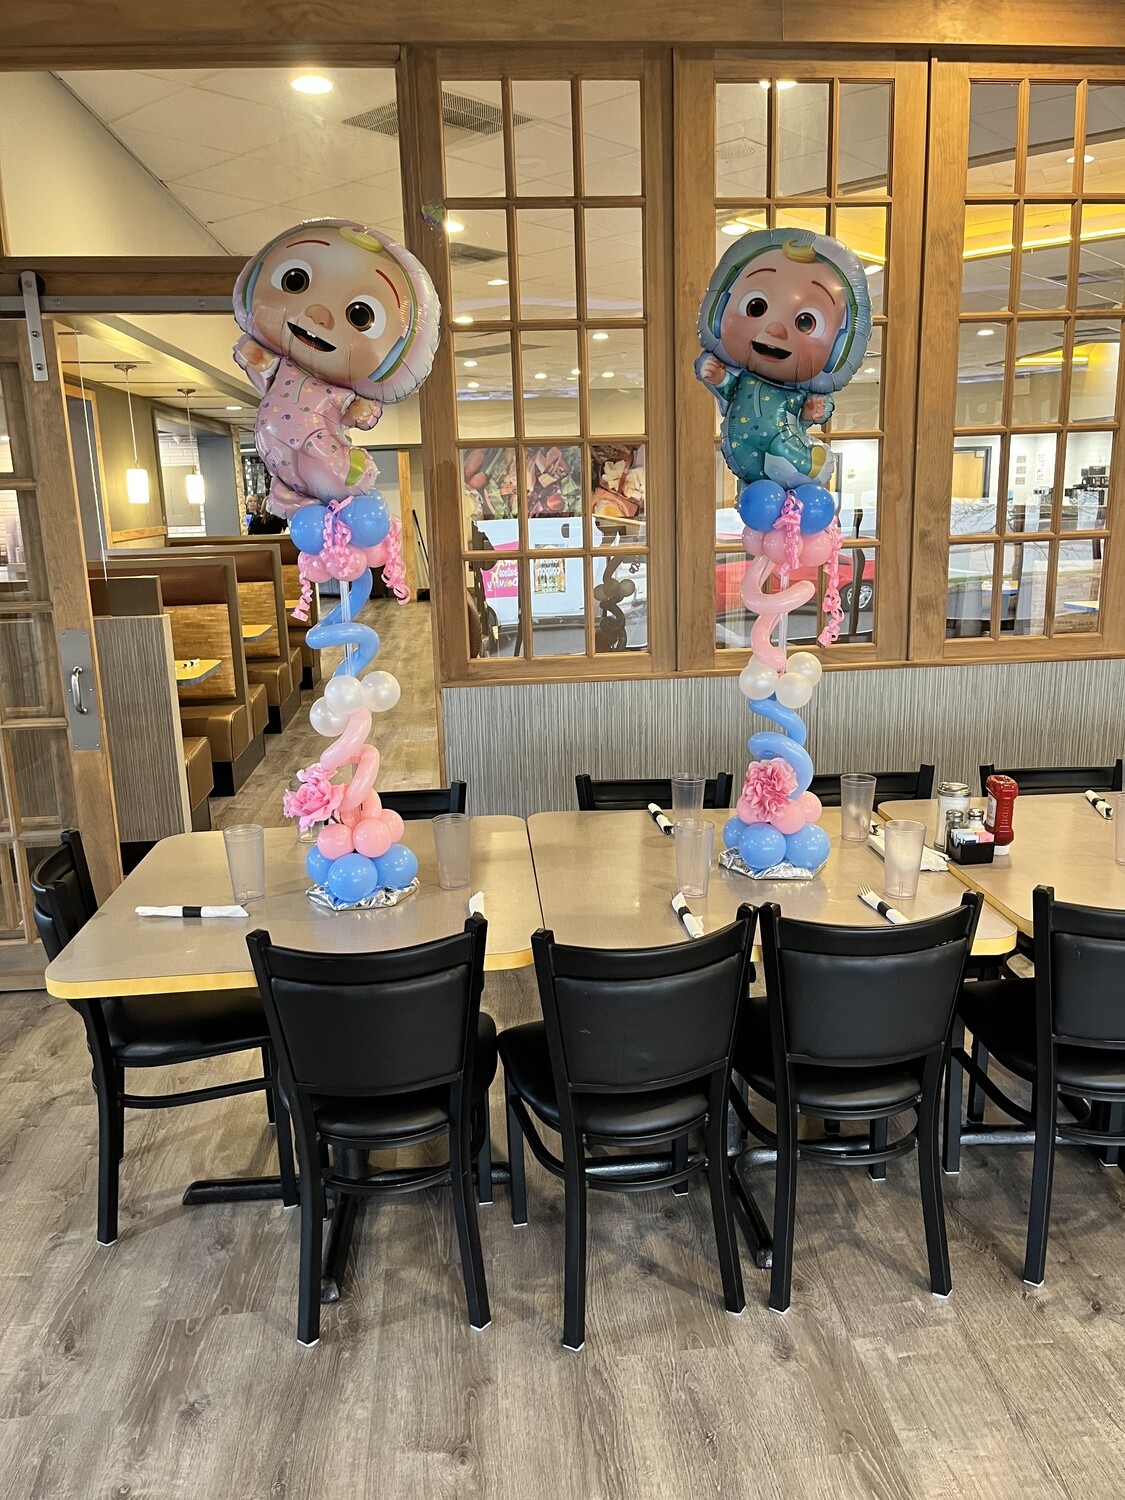 Character topped balloon, about 4 feet (indoors)